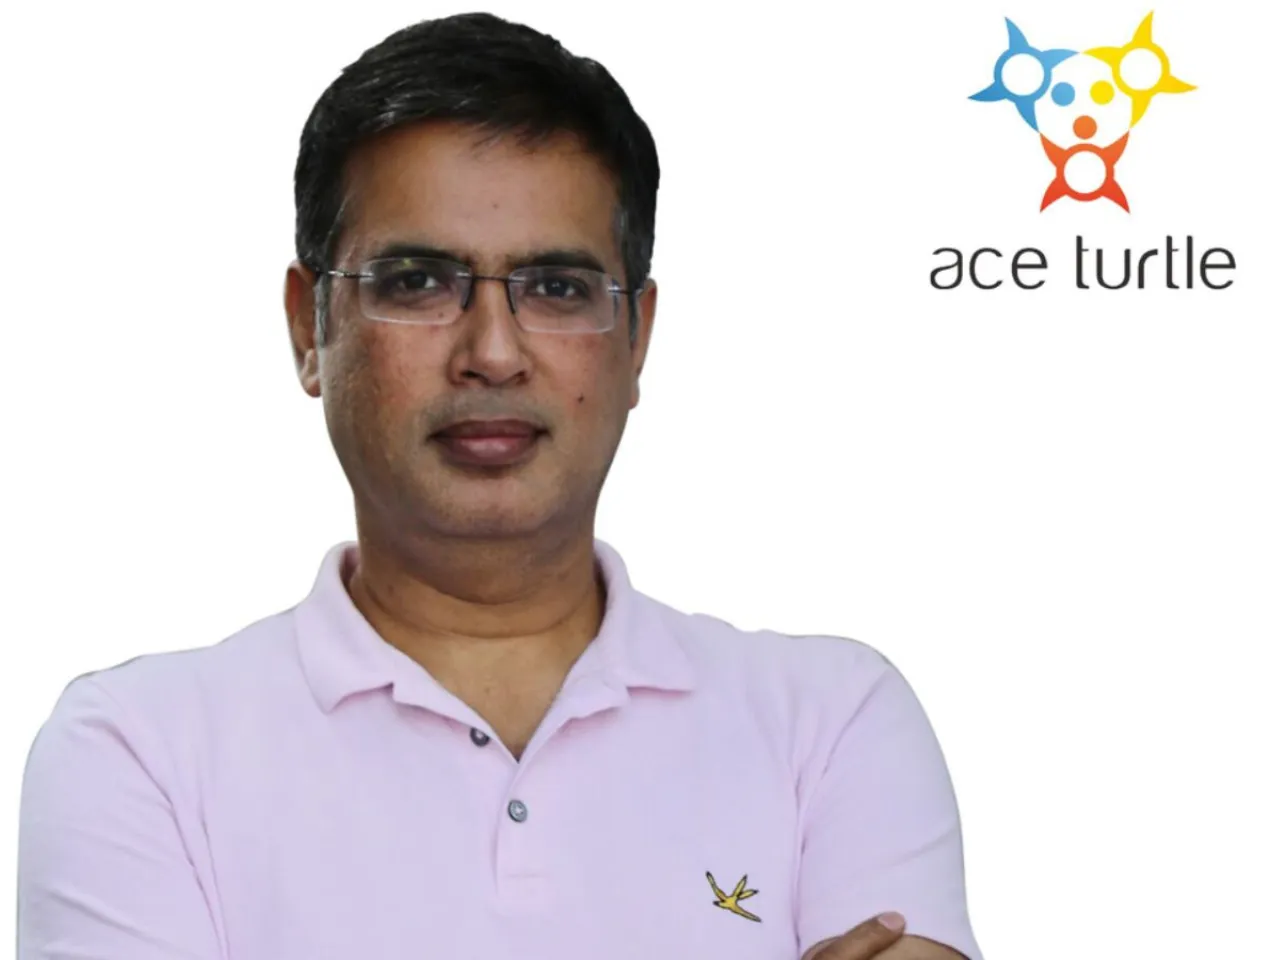 Ace Turtle offering technology services to retailers raises $34M in a Series B round